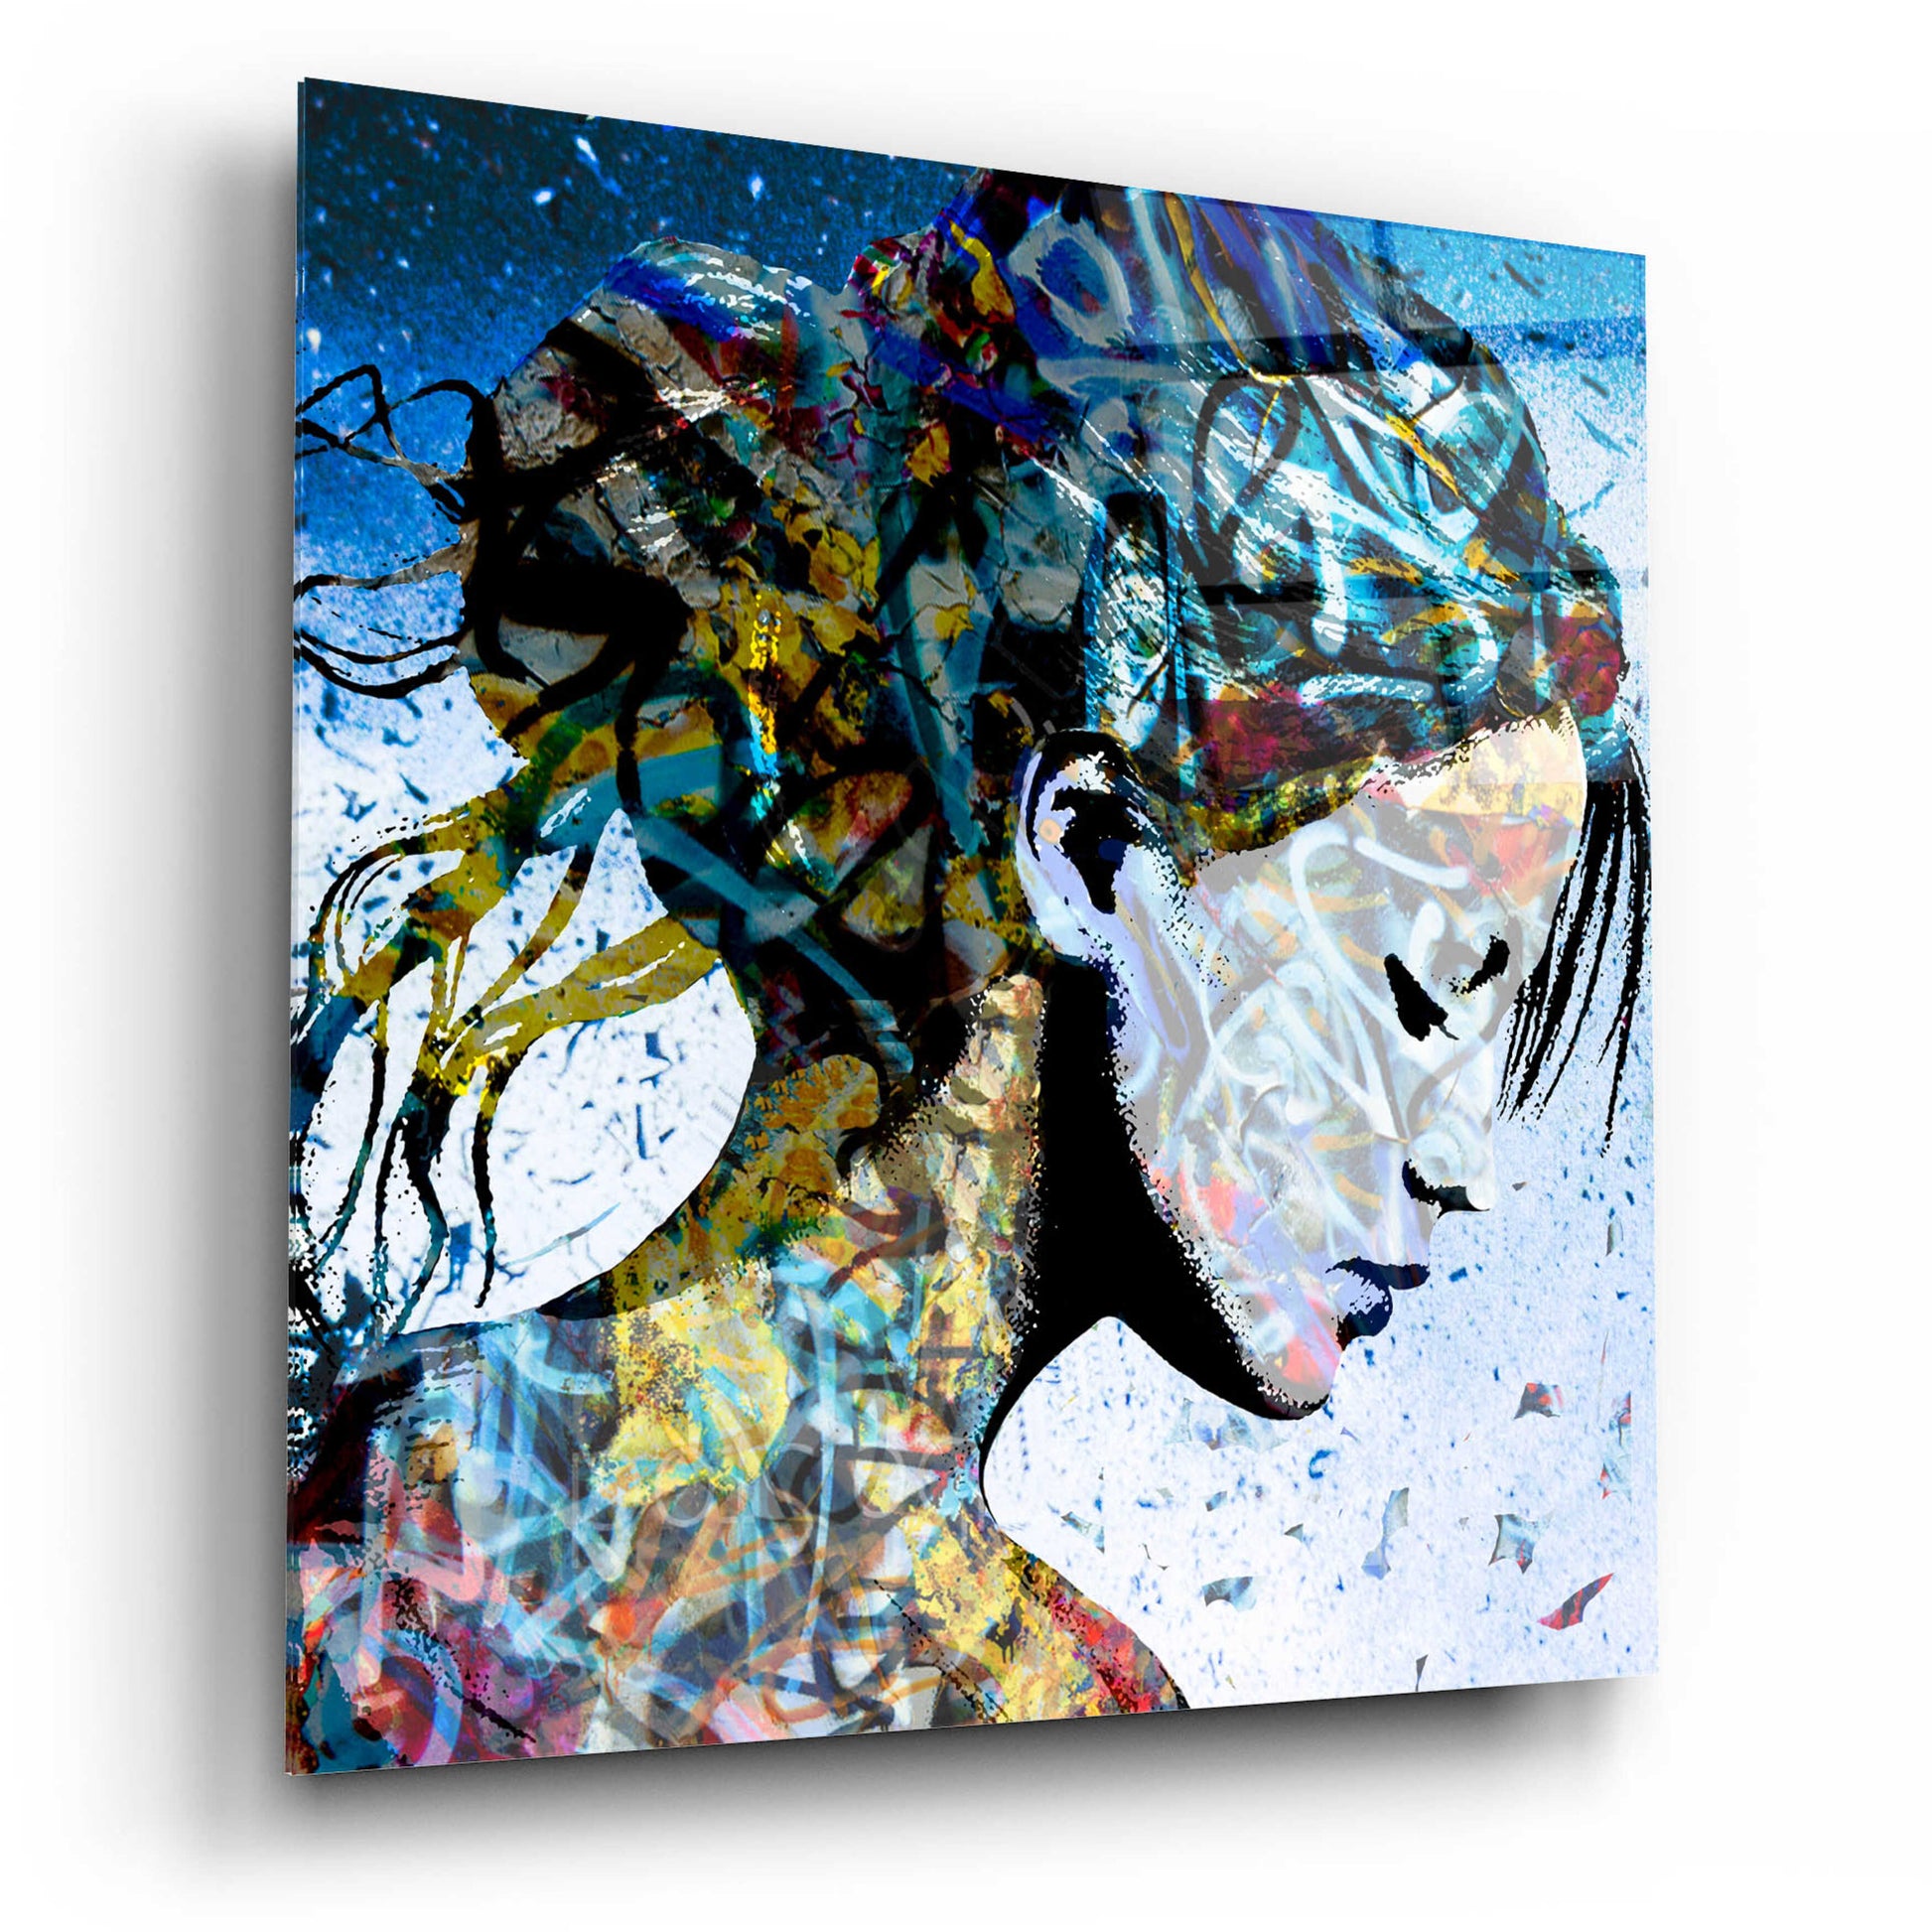 Epic Art 'THE MODEST GIRL' by DB Waterman,12x12